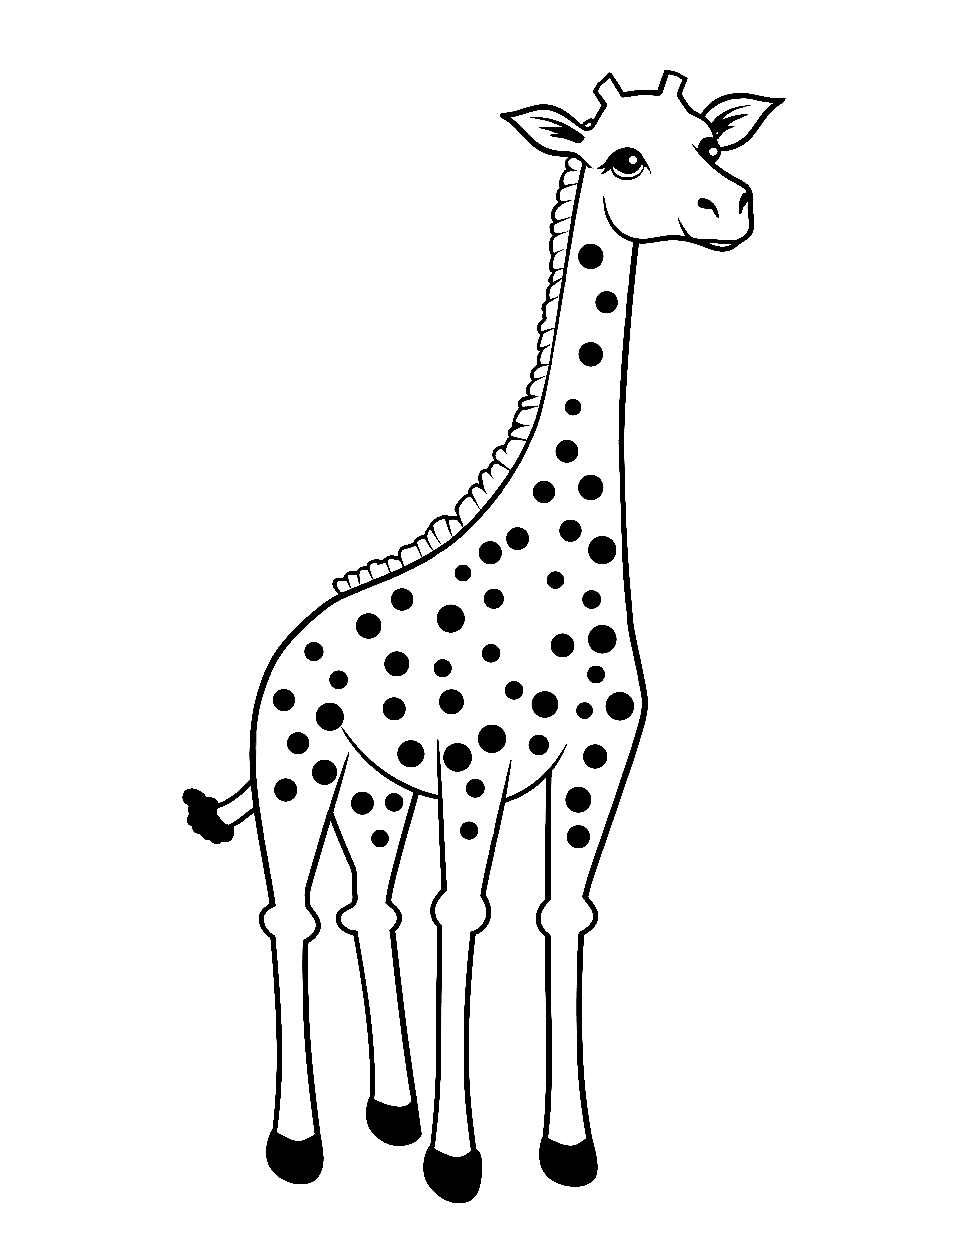 Polka-Dotted Giraffe Coloring Page - A quirky giraffe with polka dots instead of the usual patterns.